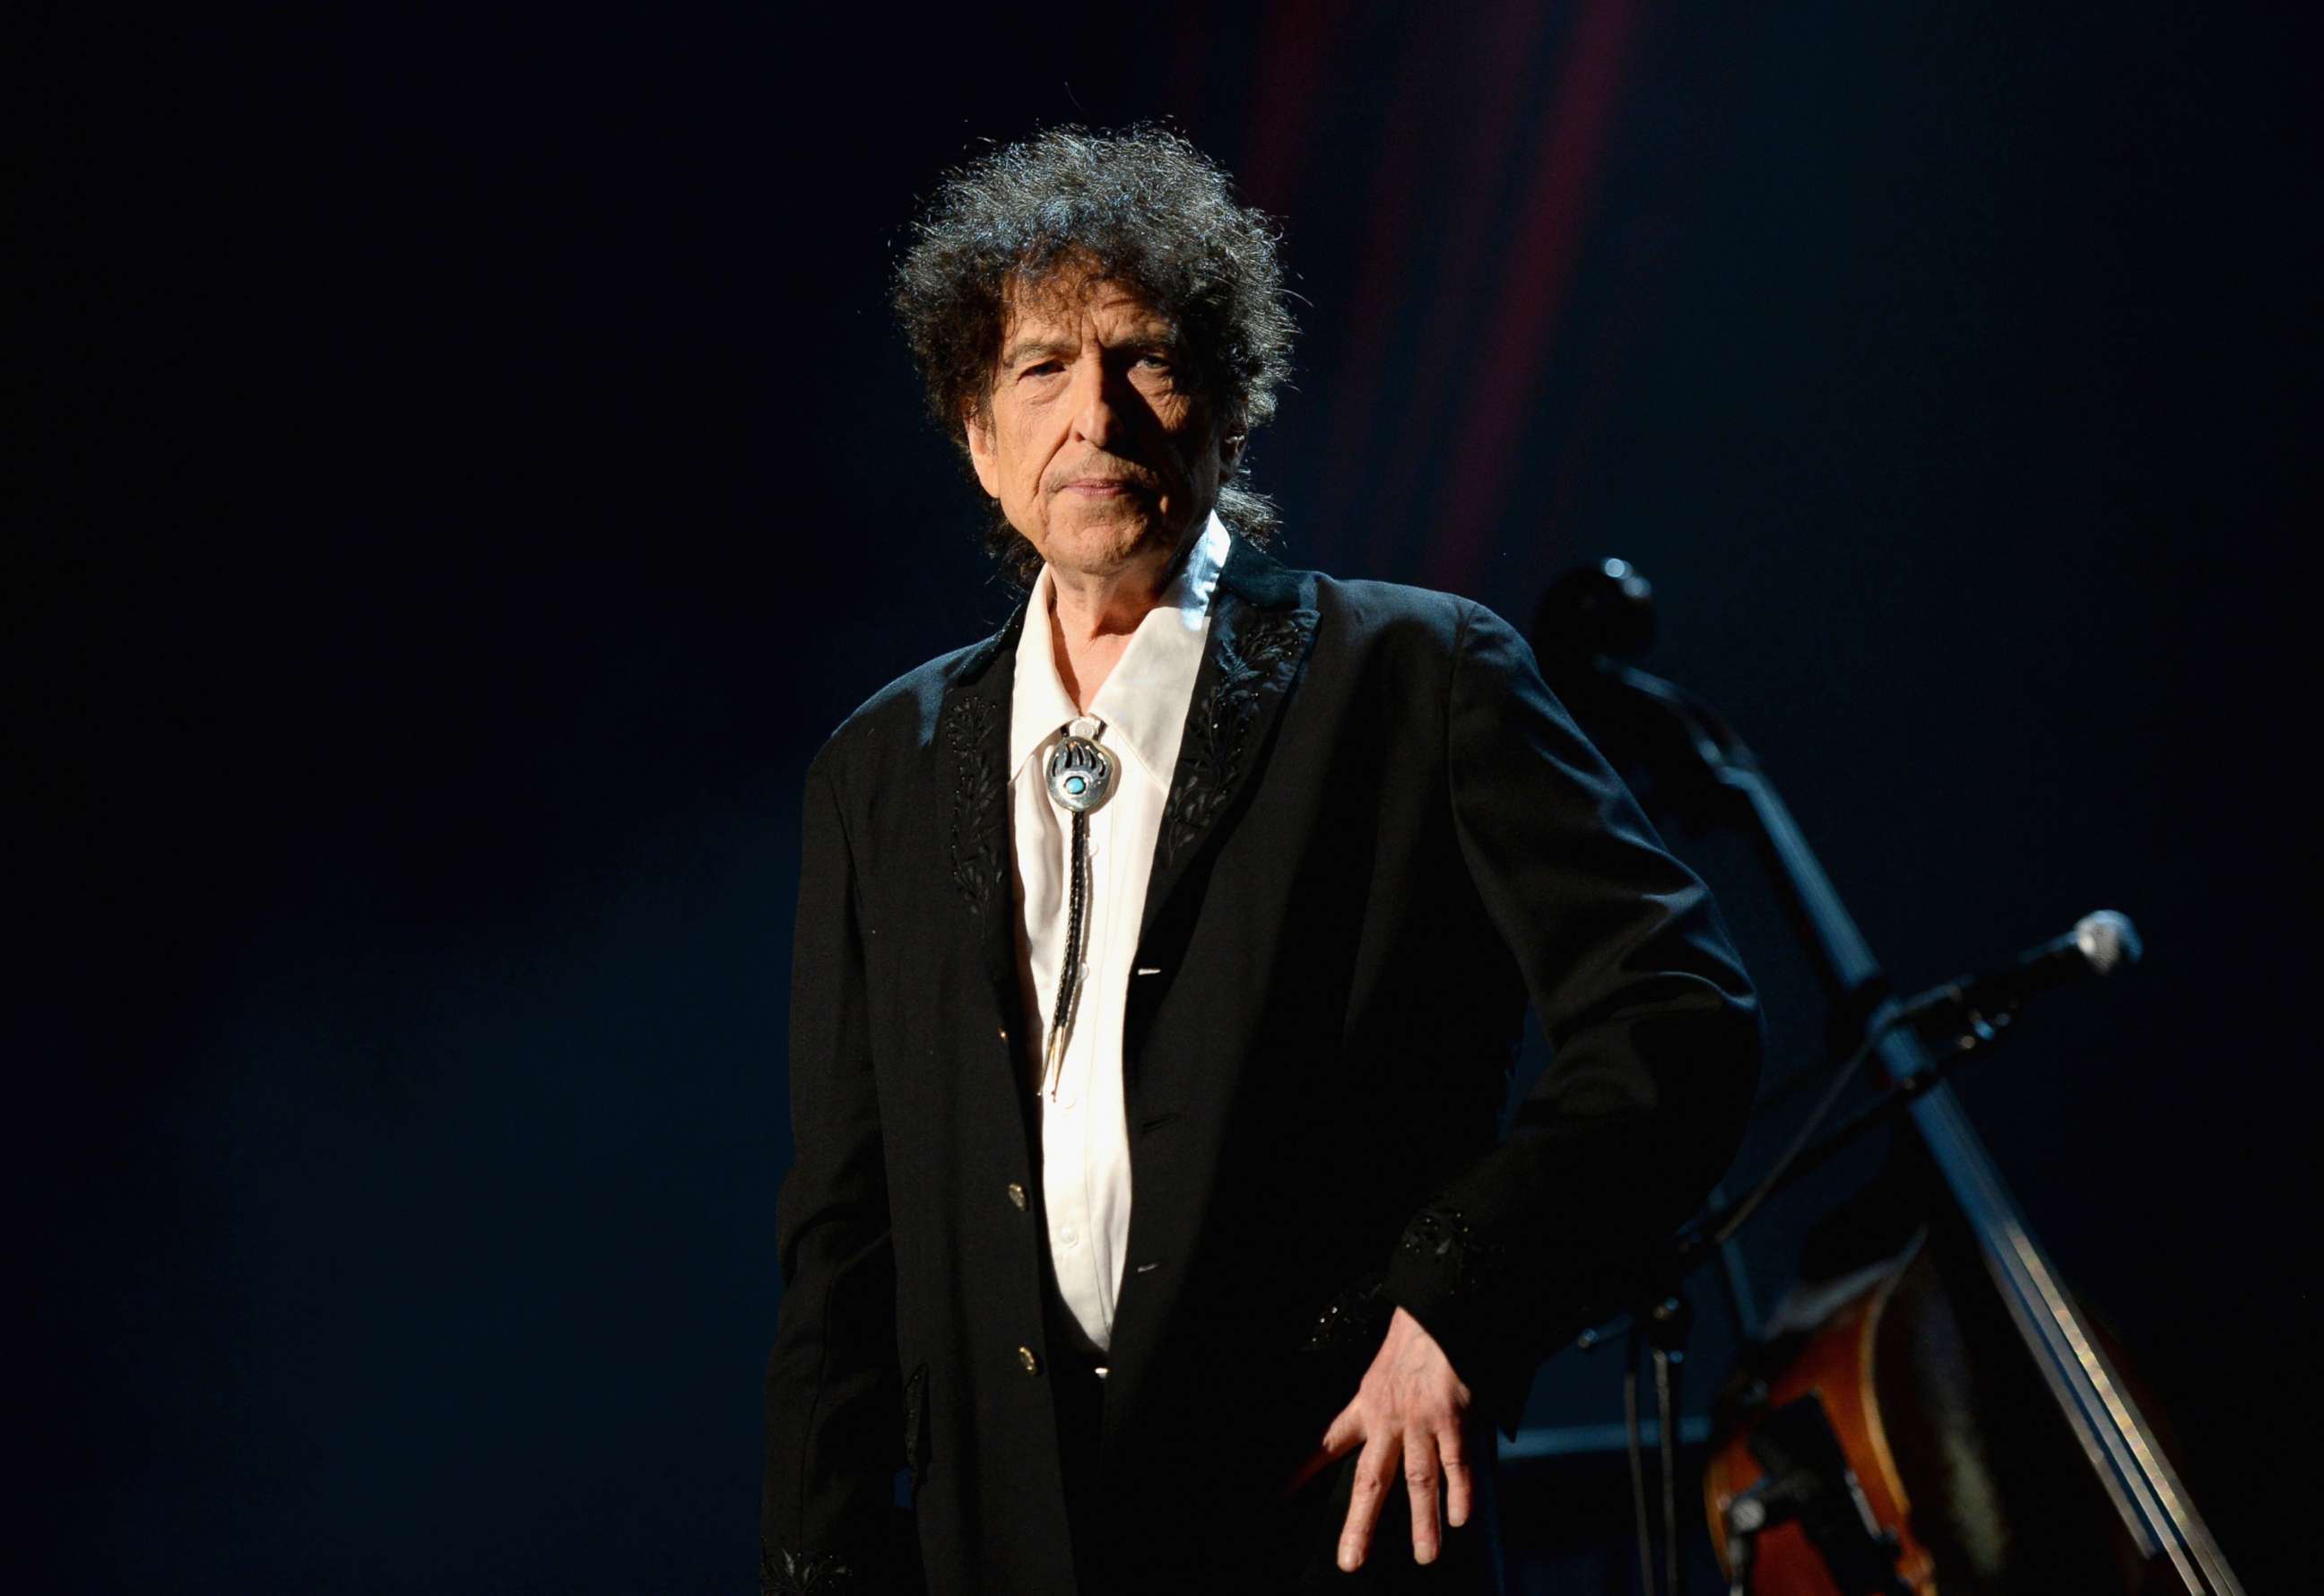 PHOTO: In this Feb. 6, 2015 file photo Bob Dylan at the Los Angeles Convention Center on in Los Angeles.